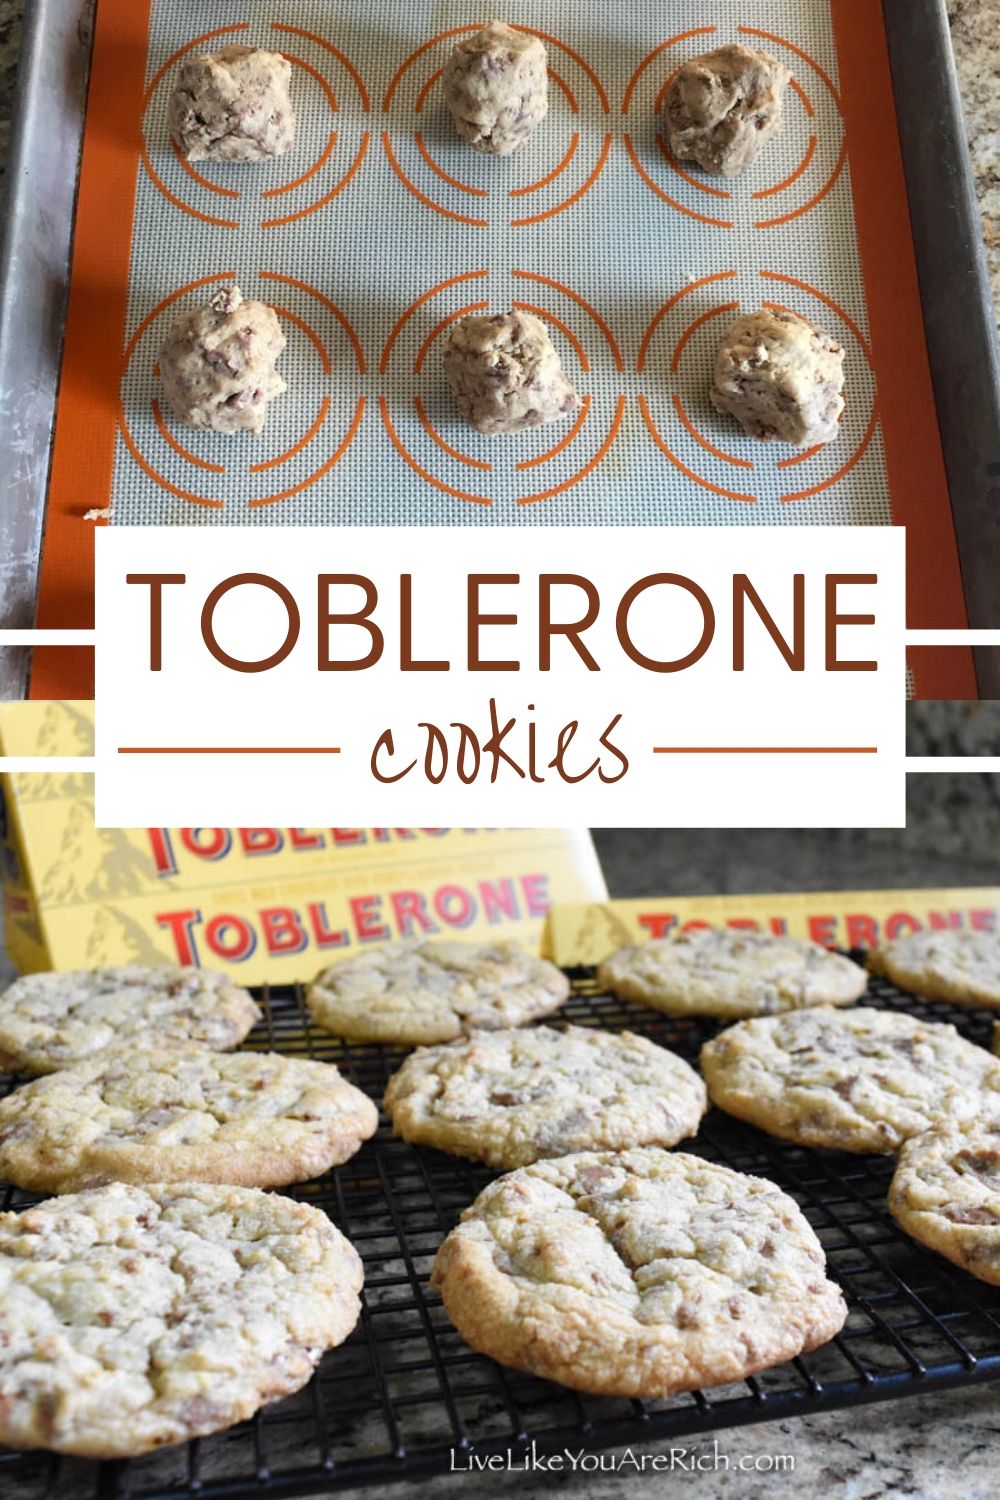 I had the idea to try the Swiss Toblerone chocolate in cookies. I wasn’t sure how the nougat bits would taste or if they would melt or stay intact. After giving it a try, I was super glad I did. The little nougat pieces add the tiniest bit of crunch. They taste amazing! #tobleronecookies #cookies #dessert 